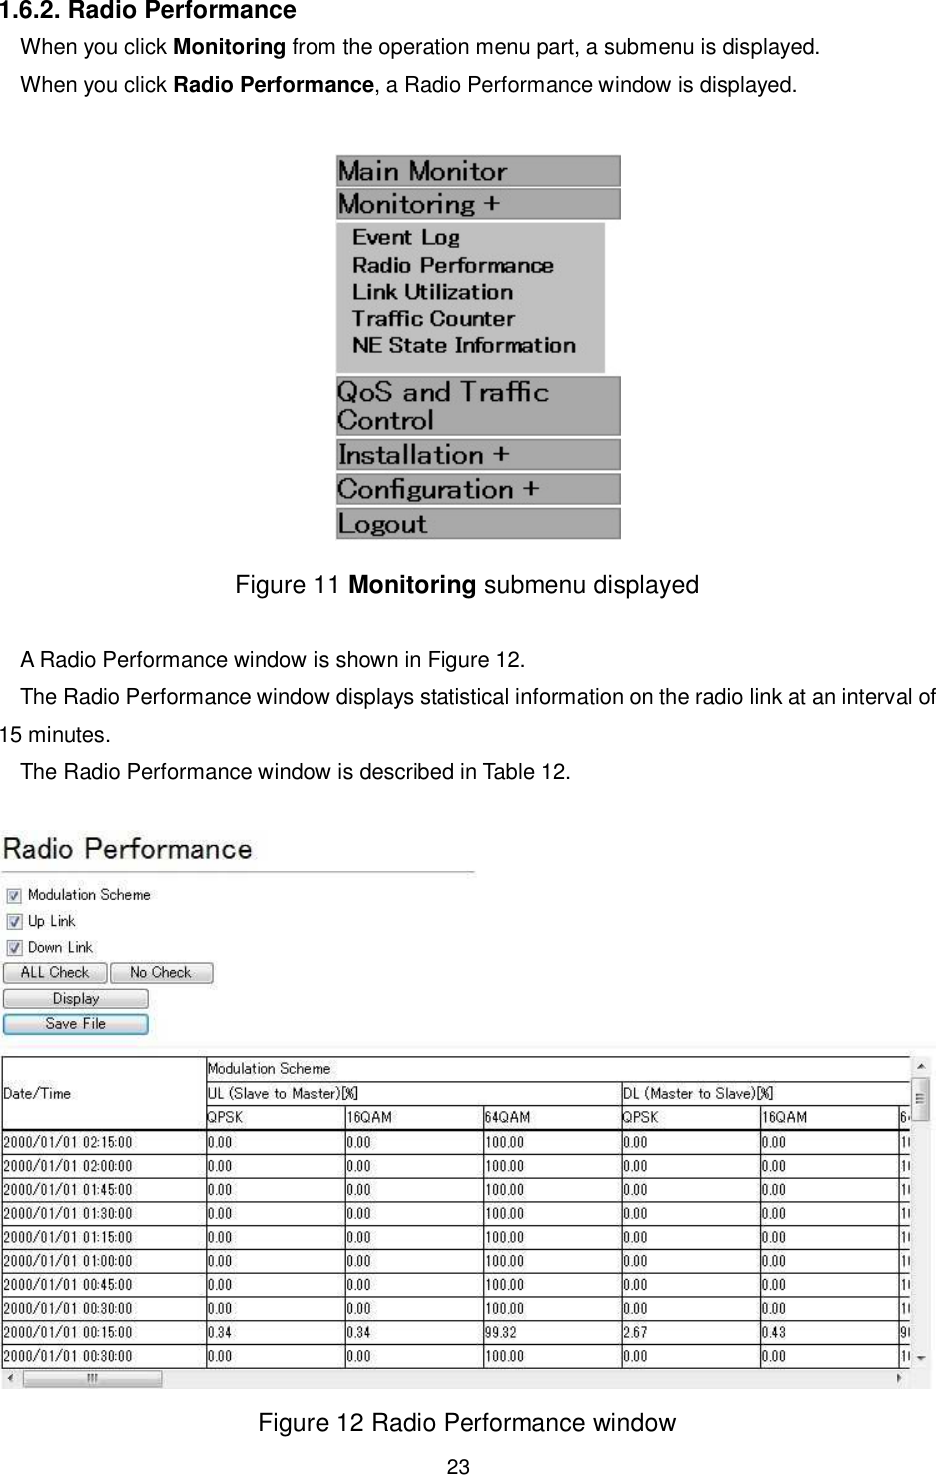    23  1.6.2. Radio Performance When you click Monitoring from the operation menu part, a submenu is displayed. When you click Radio Performance, a Radio Performance window is displayed.   Figure 11 Monitoring submenu displayed  A Radio Performance window is shown in Figure 12. The Radio Performance window displays statistical information on the radio link at an interval of 15 minutes. The Radio Performance window is described in Table 12.   Figure 12 Radio Performance window 